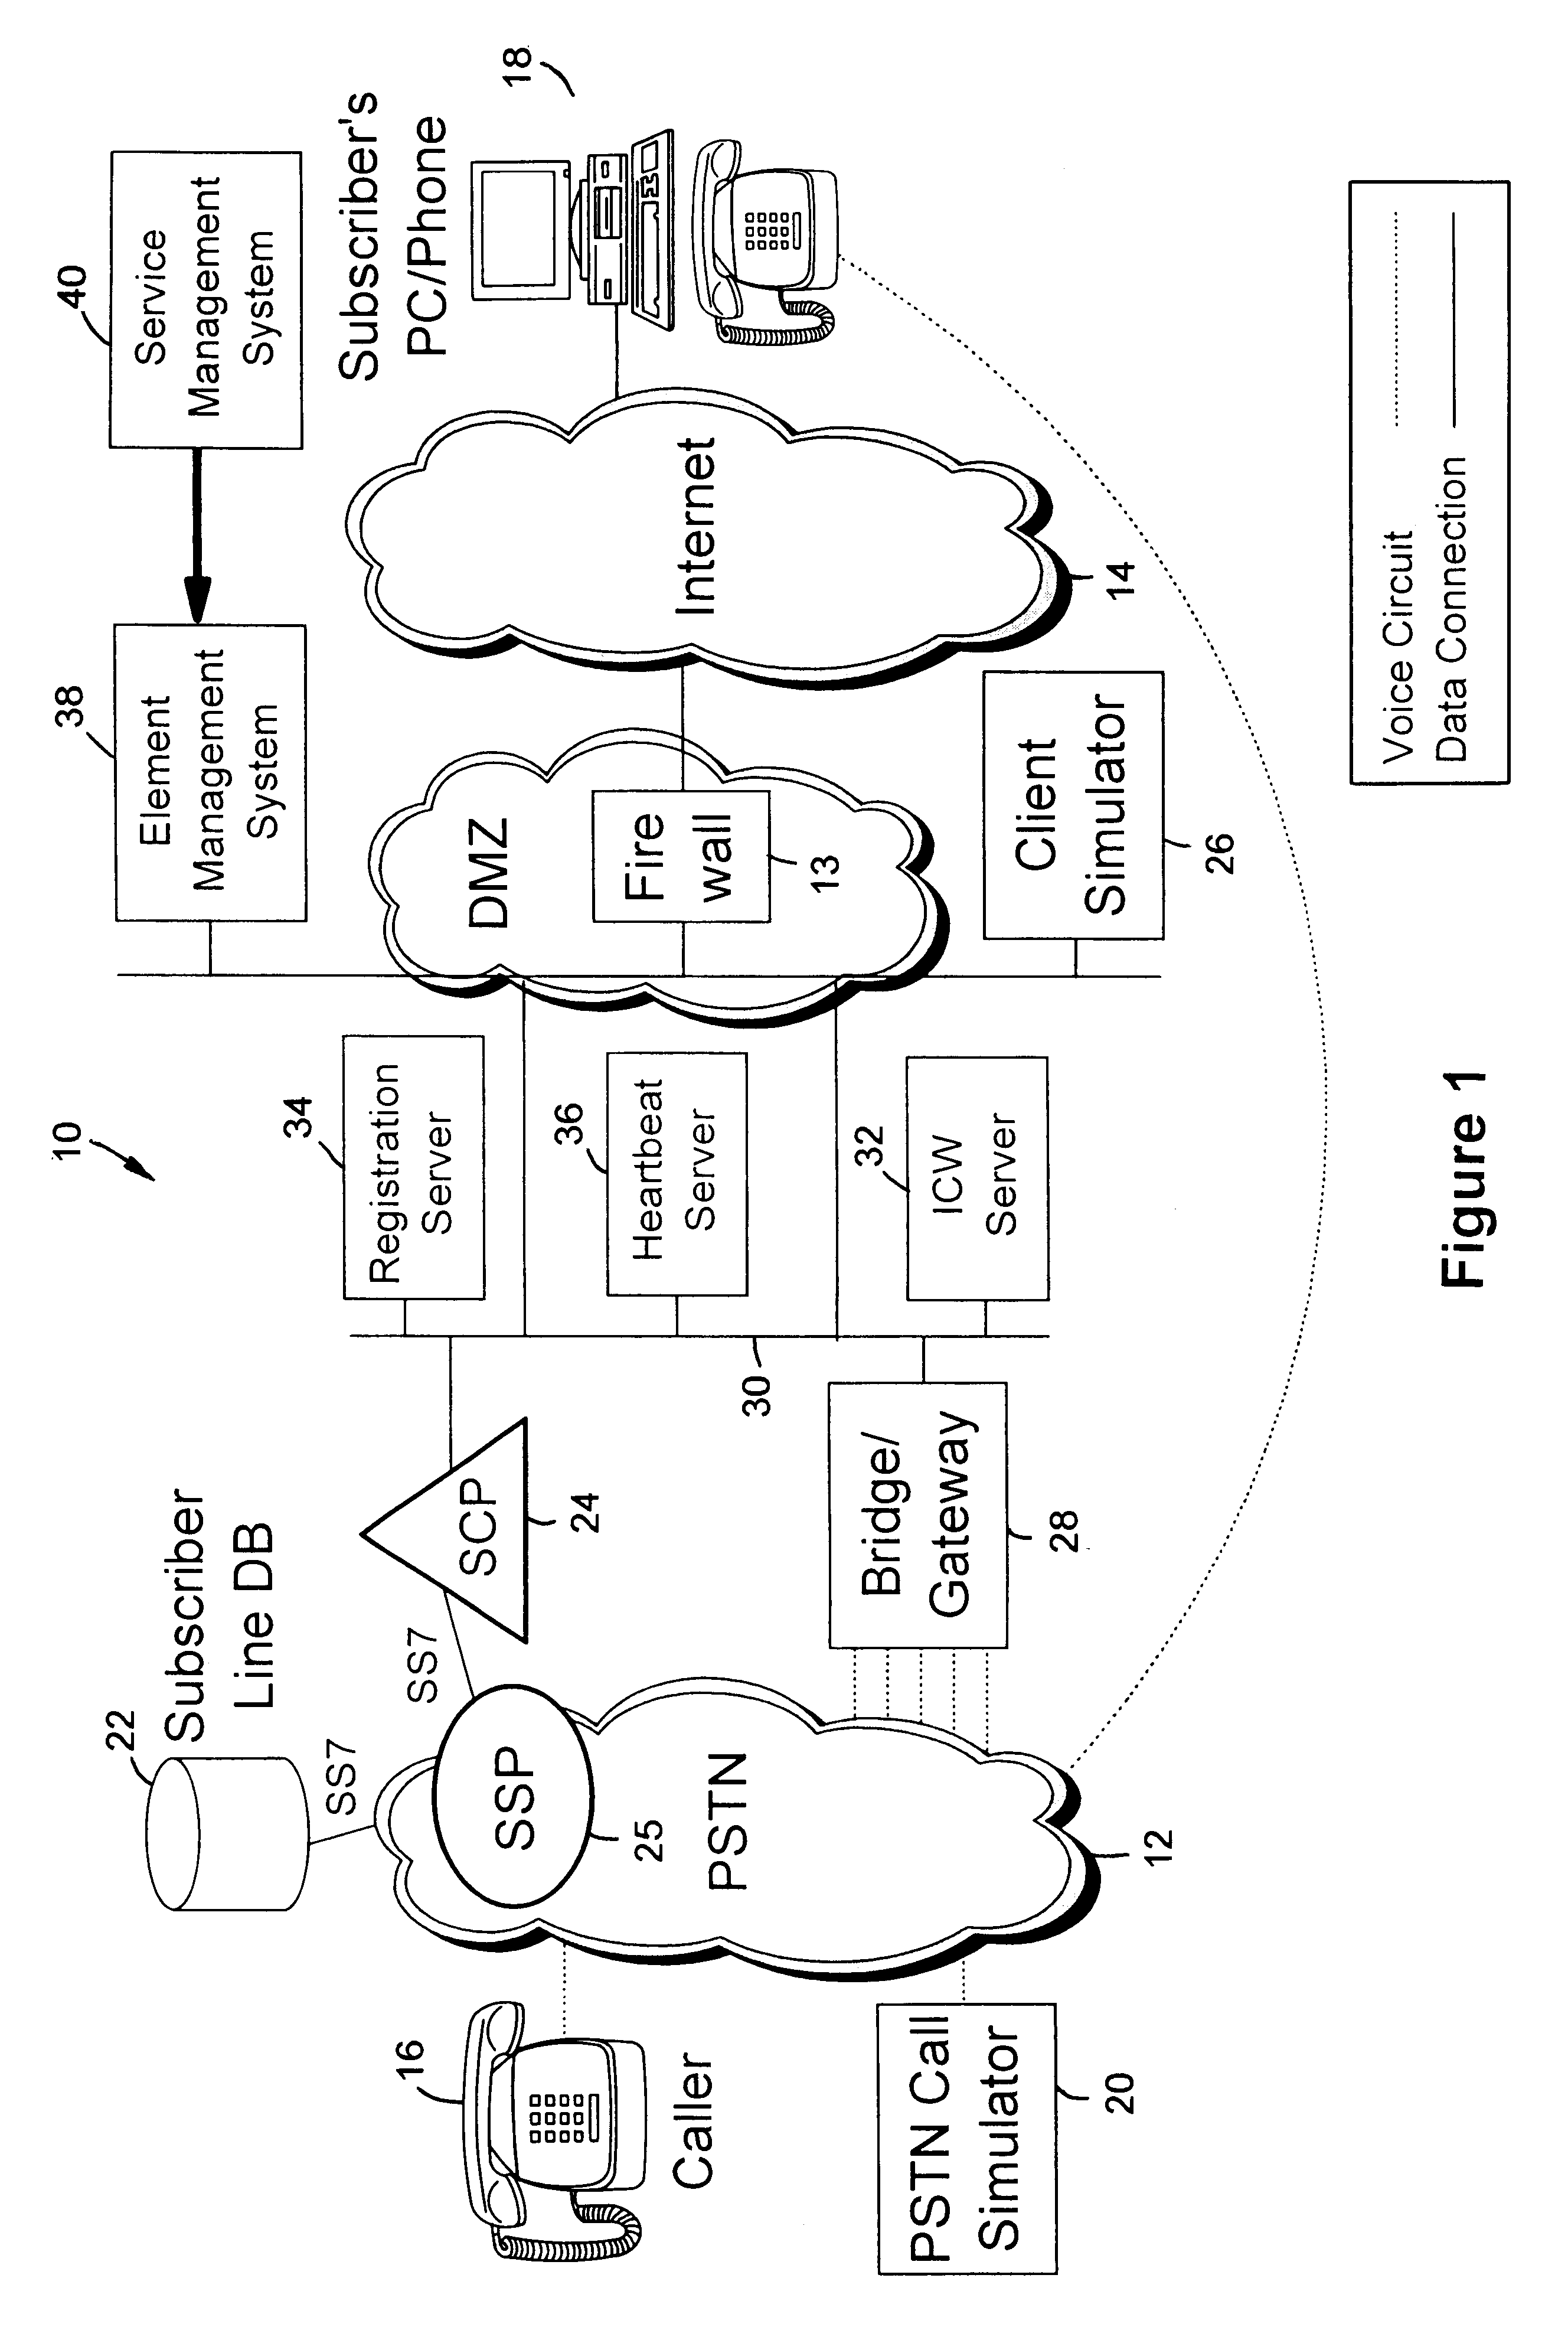 System and method of operation for verifying and validating public switch telephone networks (PSTN) to (IP) network services